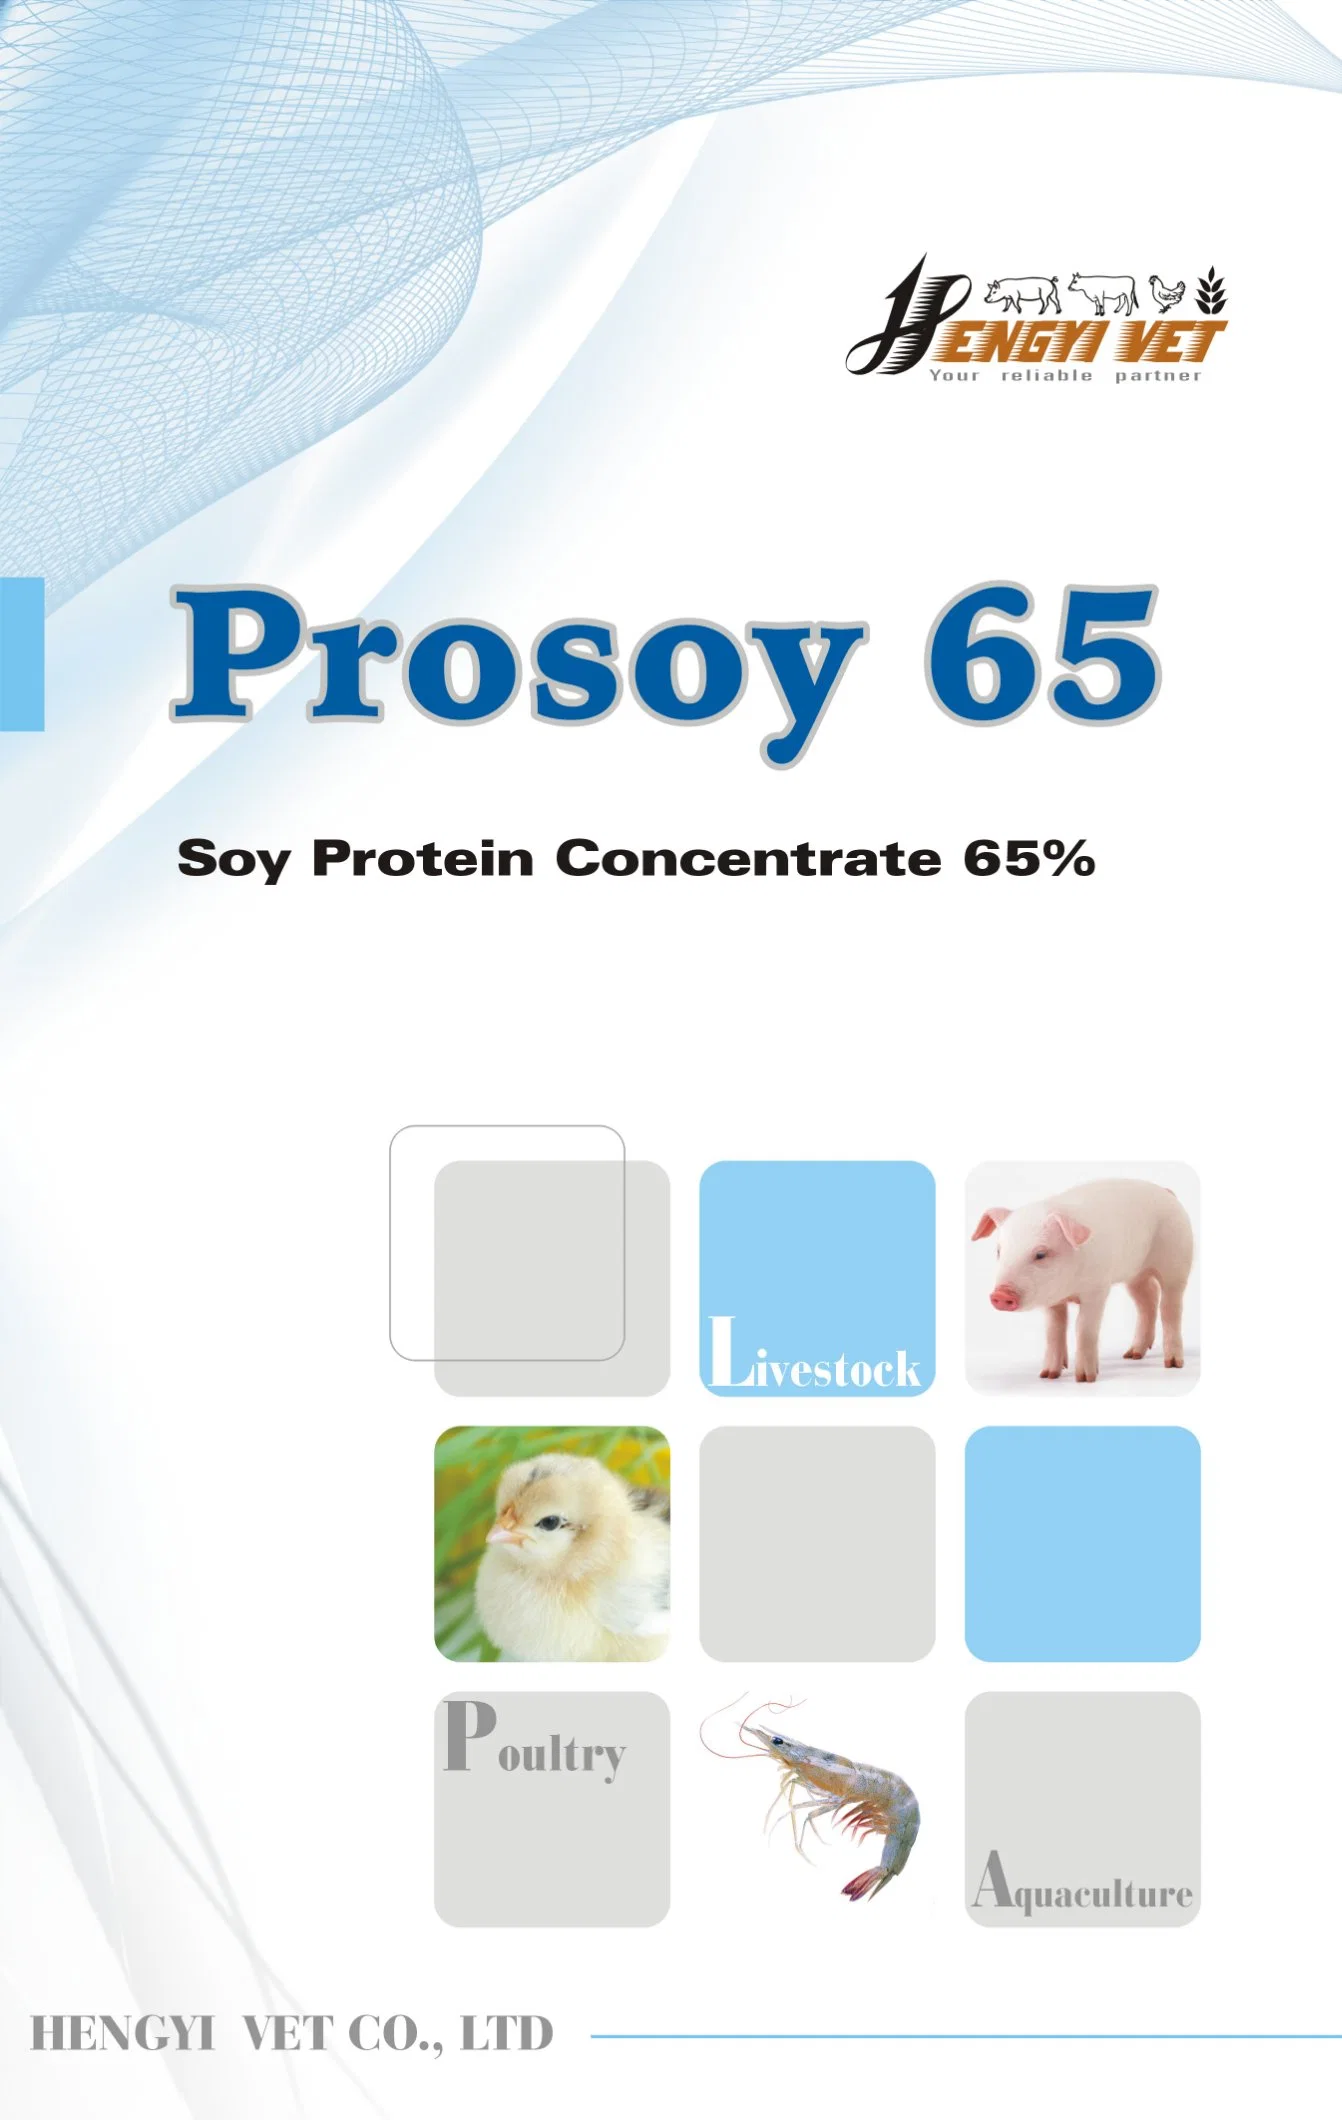 Prosoy 65 (Soy Protein Concentrate)